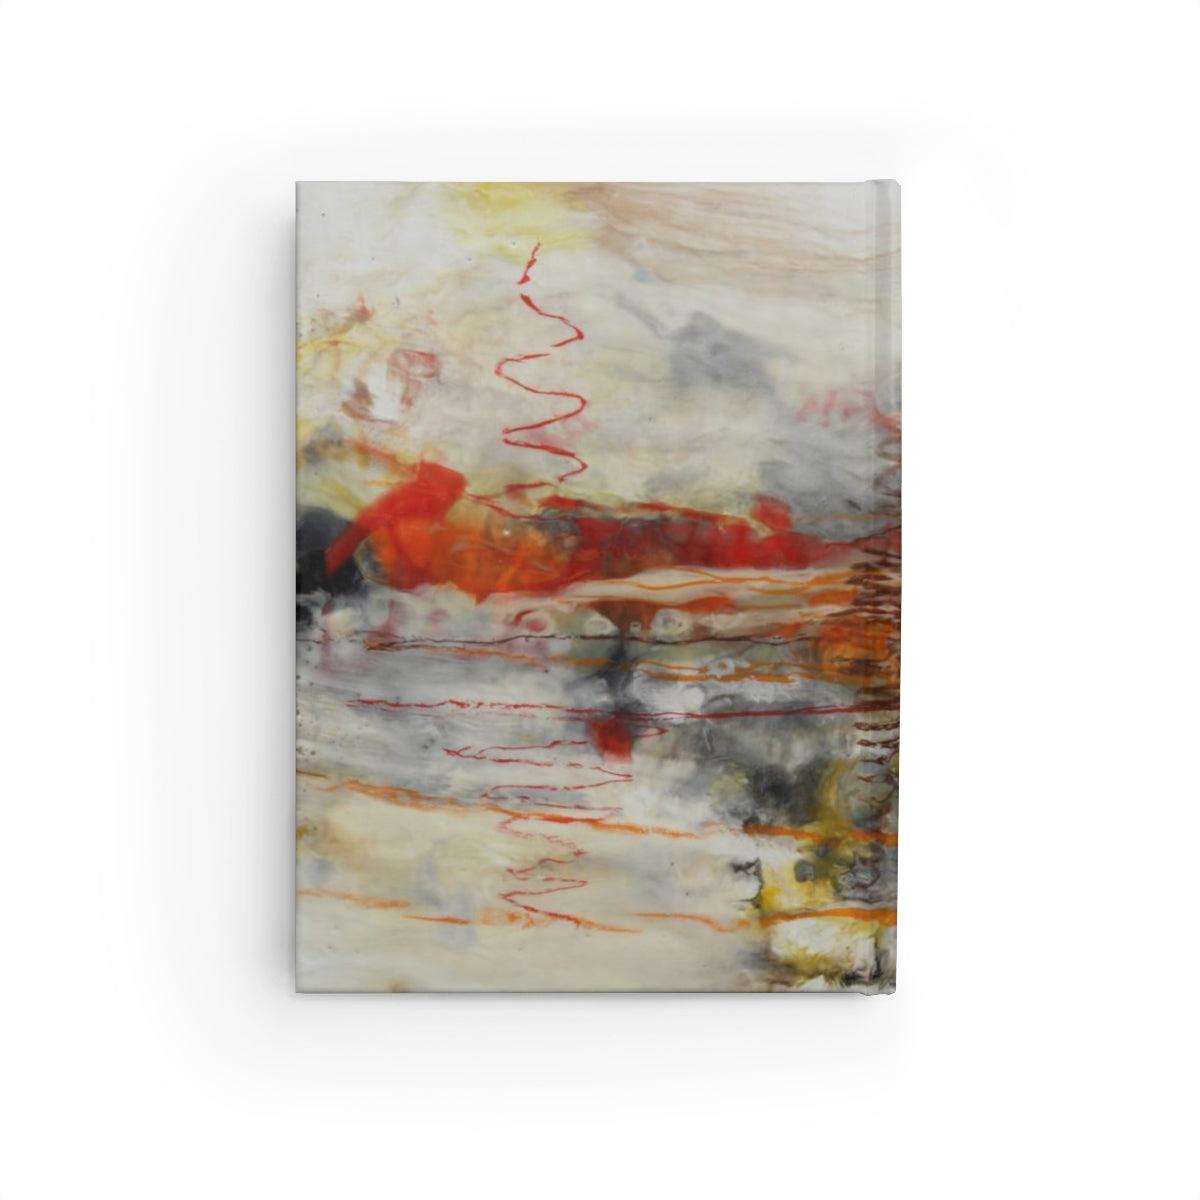 "Horizons" Journal - Ruled Line-Paper products - Mike Giannella - Encaustic Painting - Mixed Media Artist - Art Prints